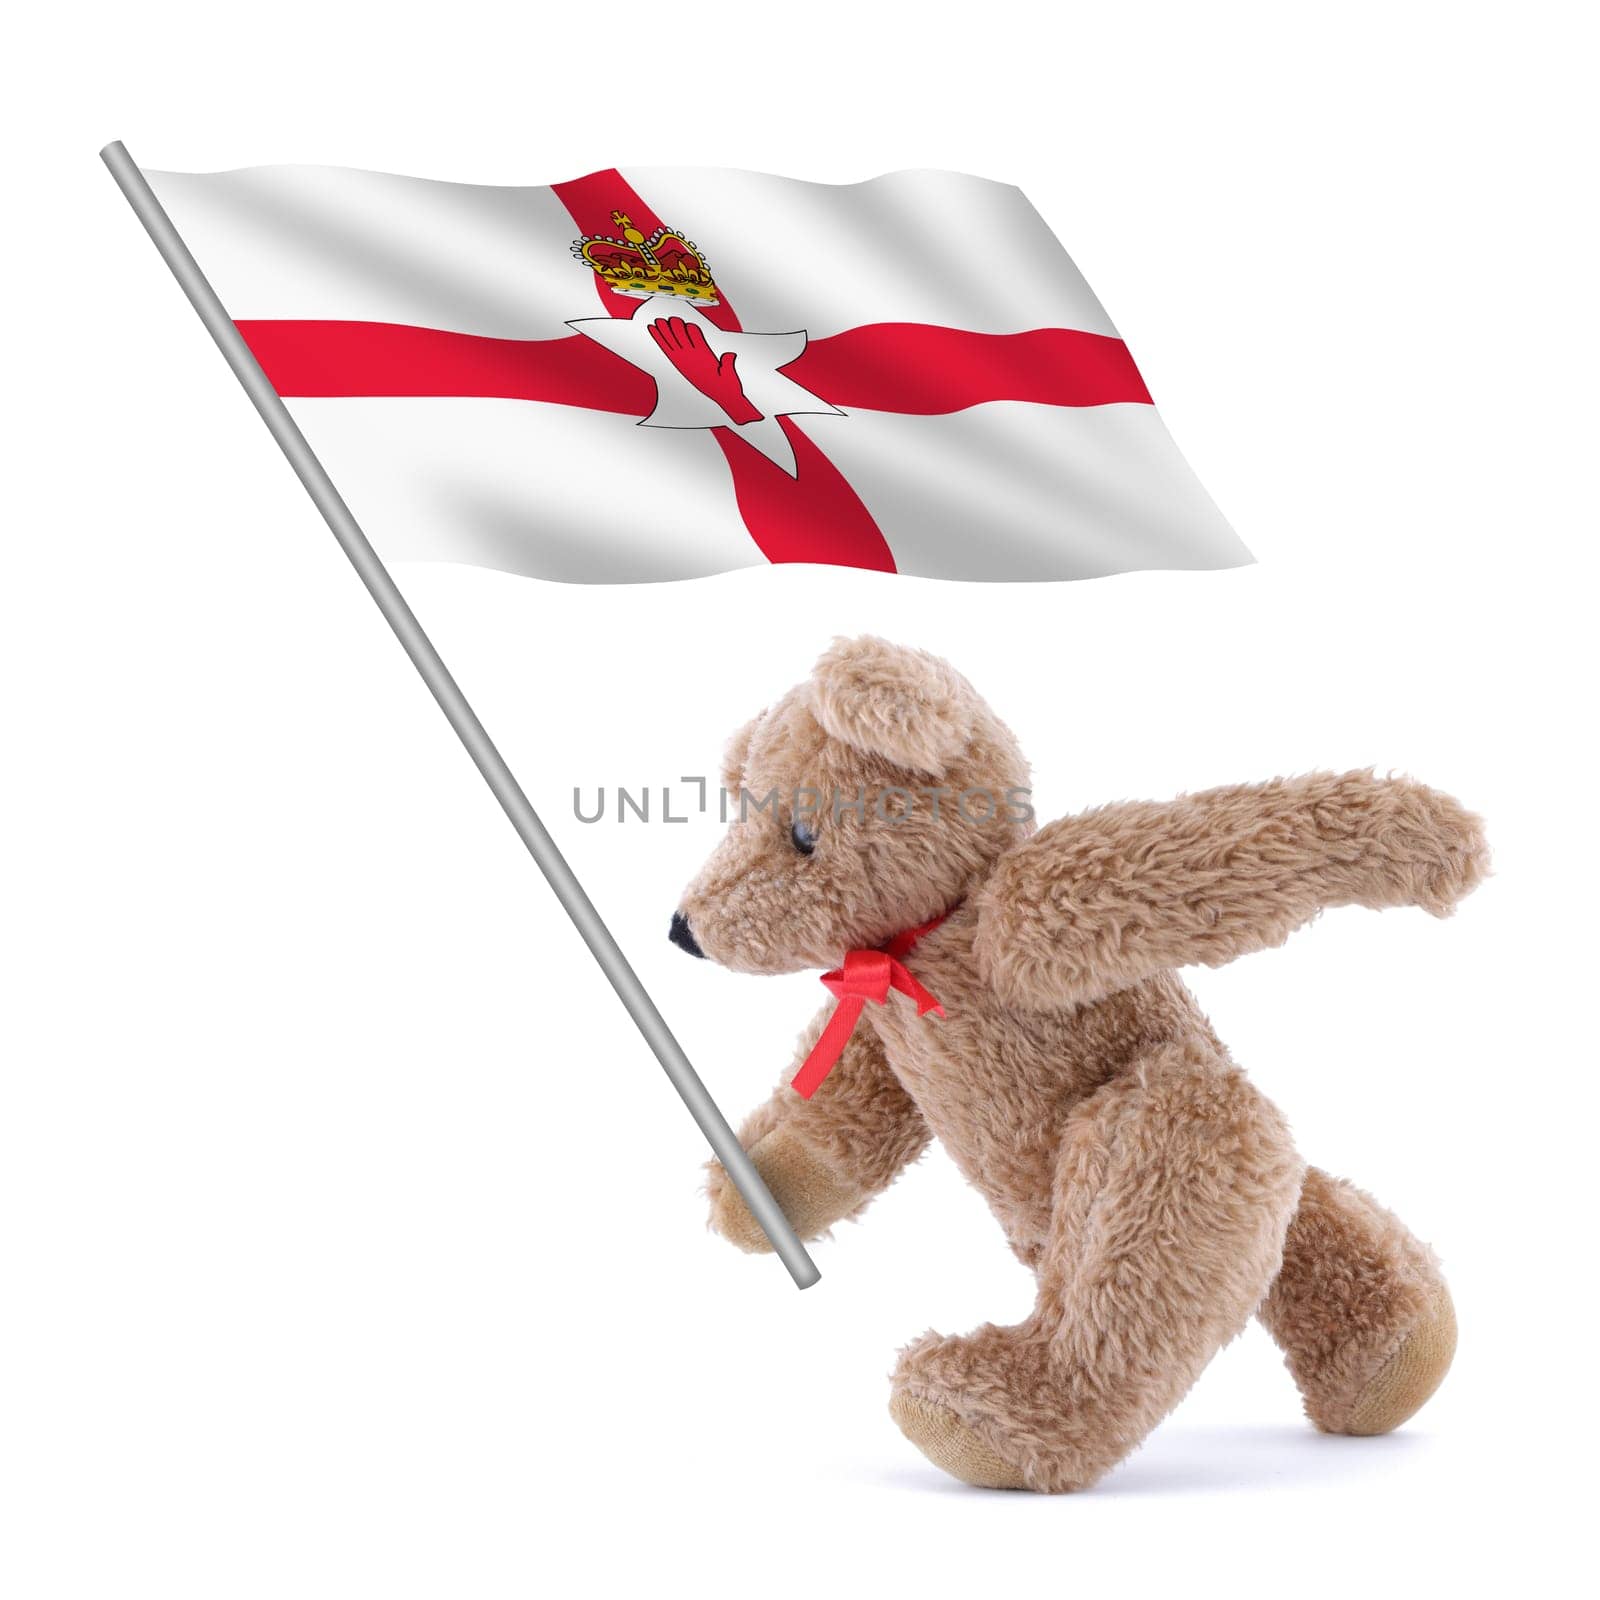 Northern Ireland flag being carried by a cute teddy bear by VivacityImages